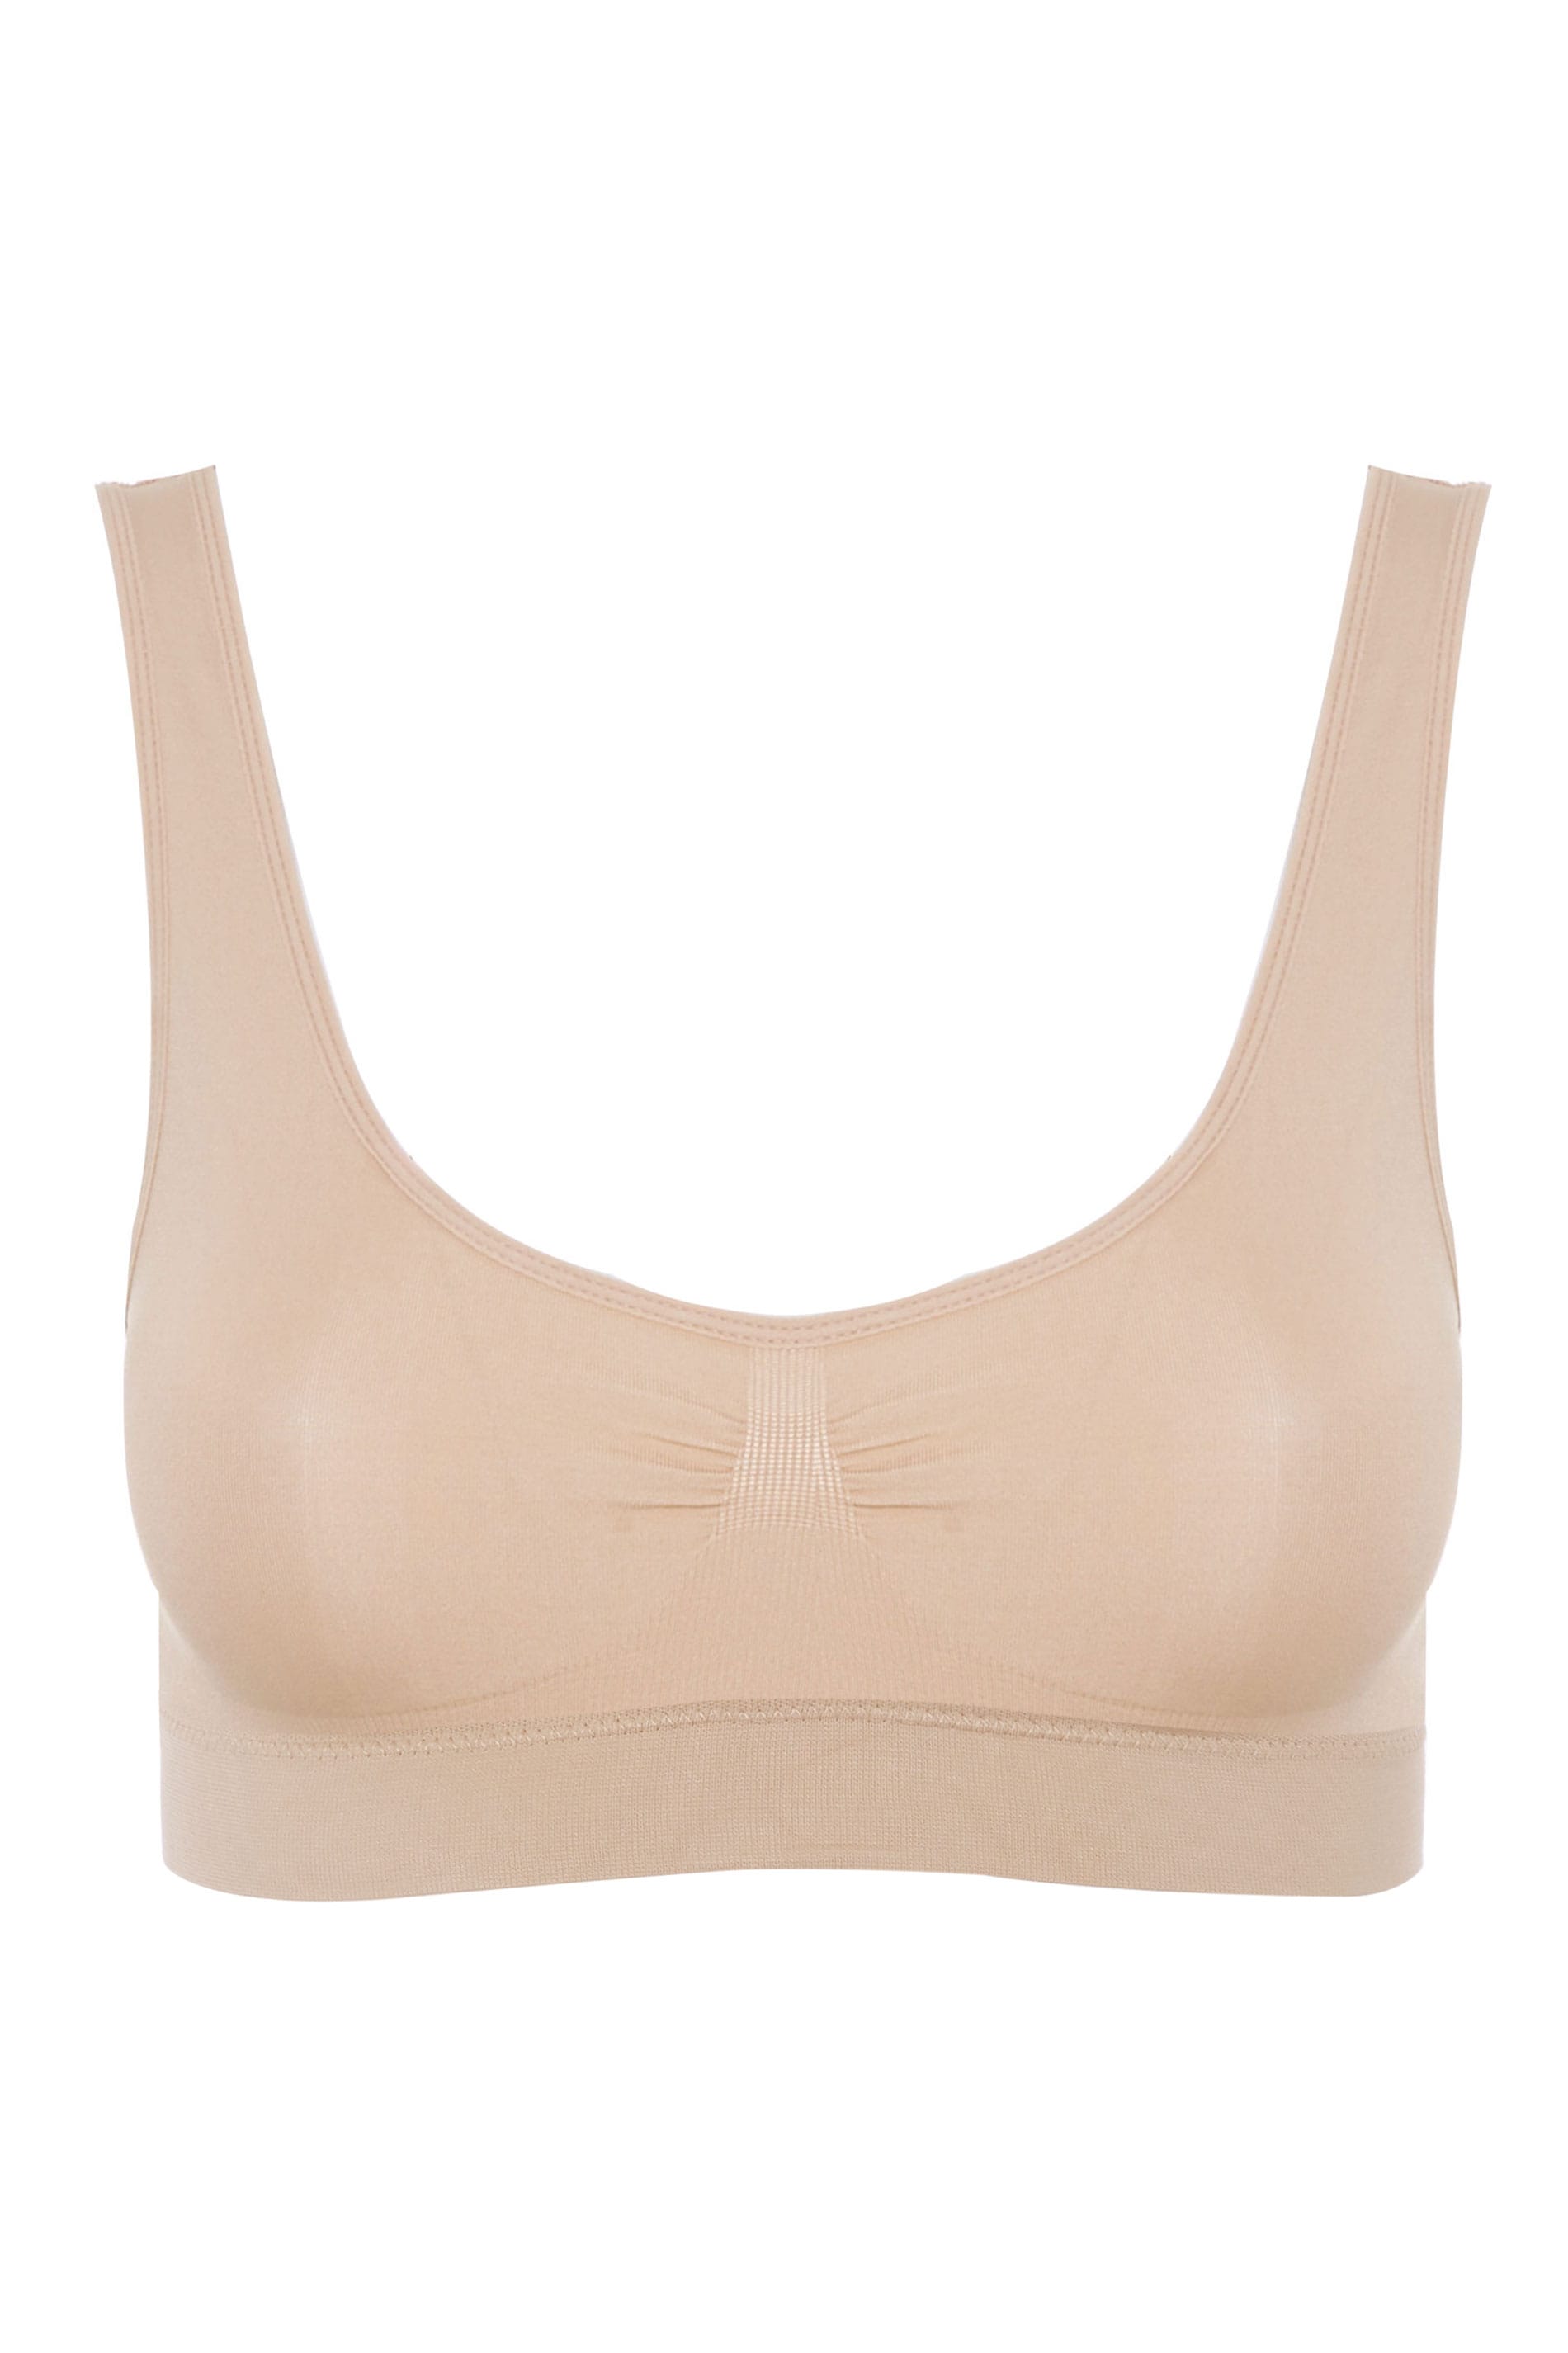 Plus Size Nude Seamless Non-Padded Non-Wired Bralette